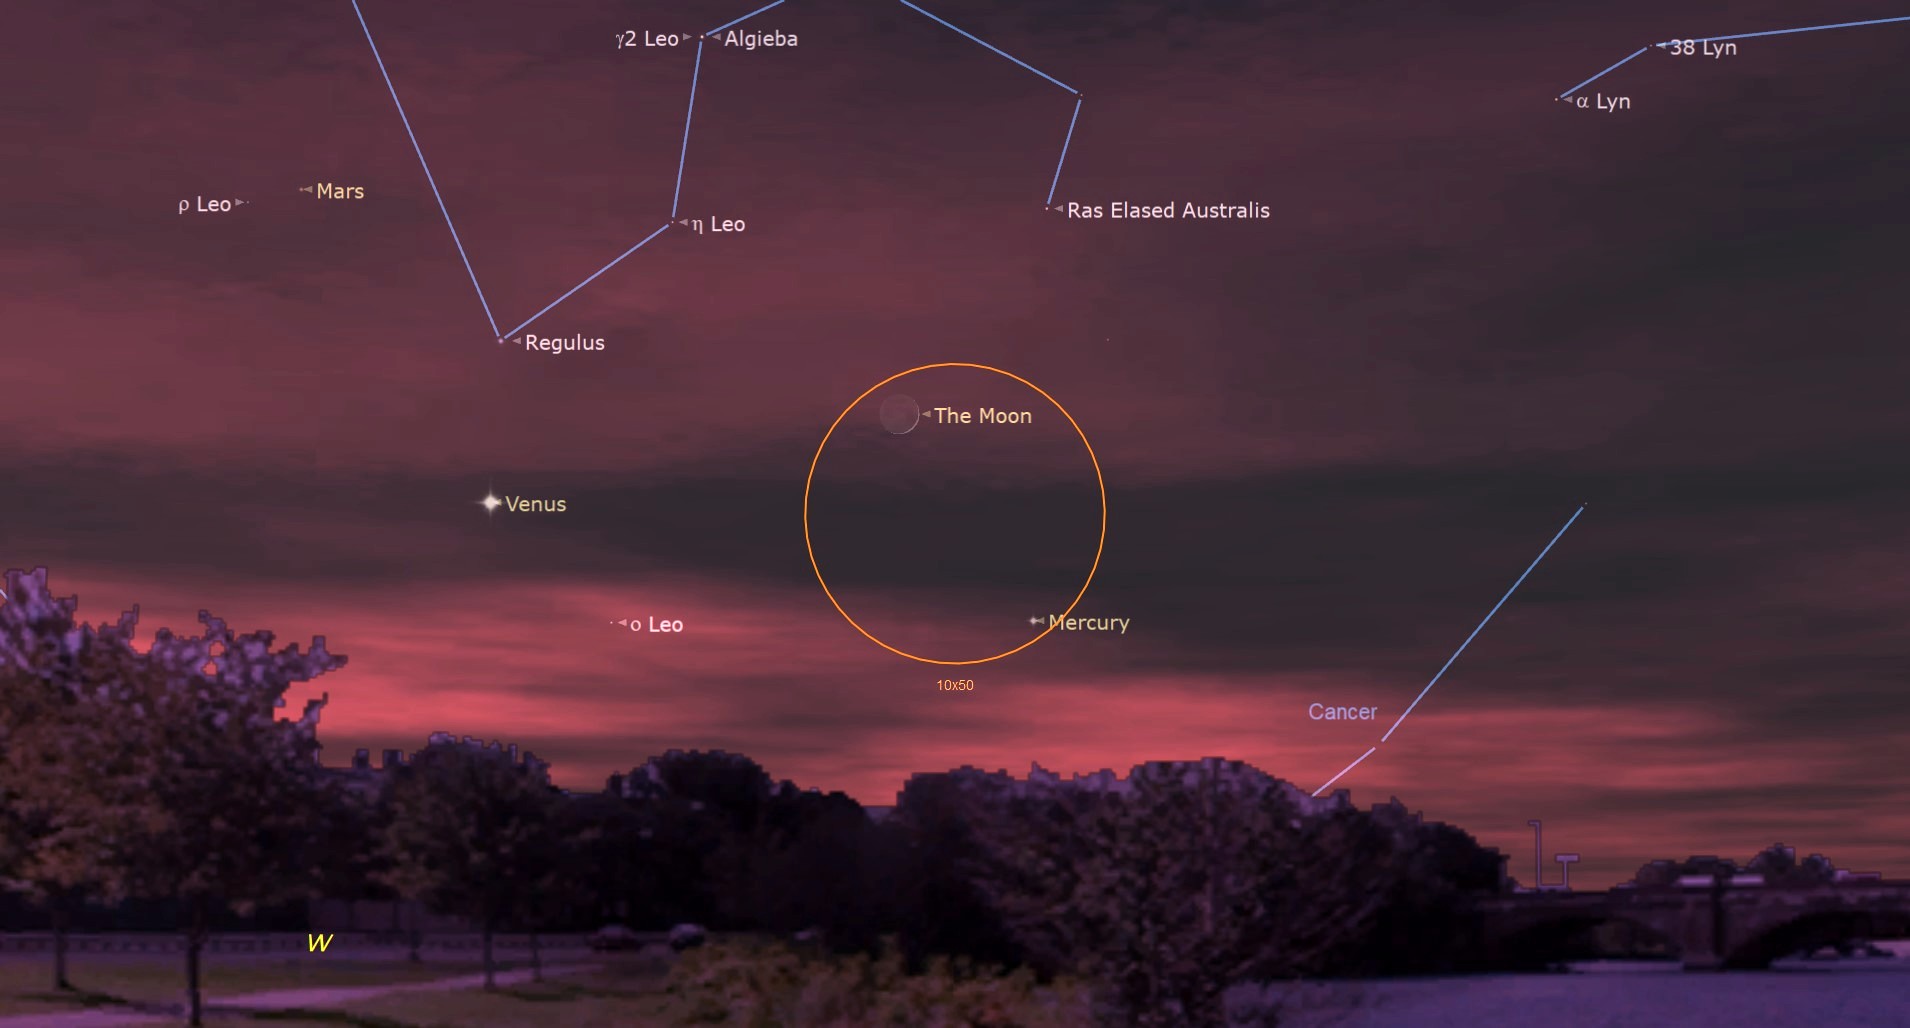 July 19, 2023 at 845 pm - Crescent Moon above Venus and Mercury, depicted in a hazy purple sky